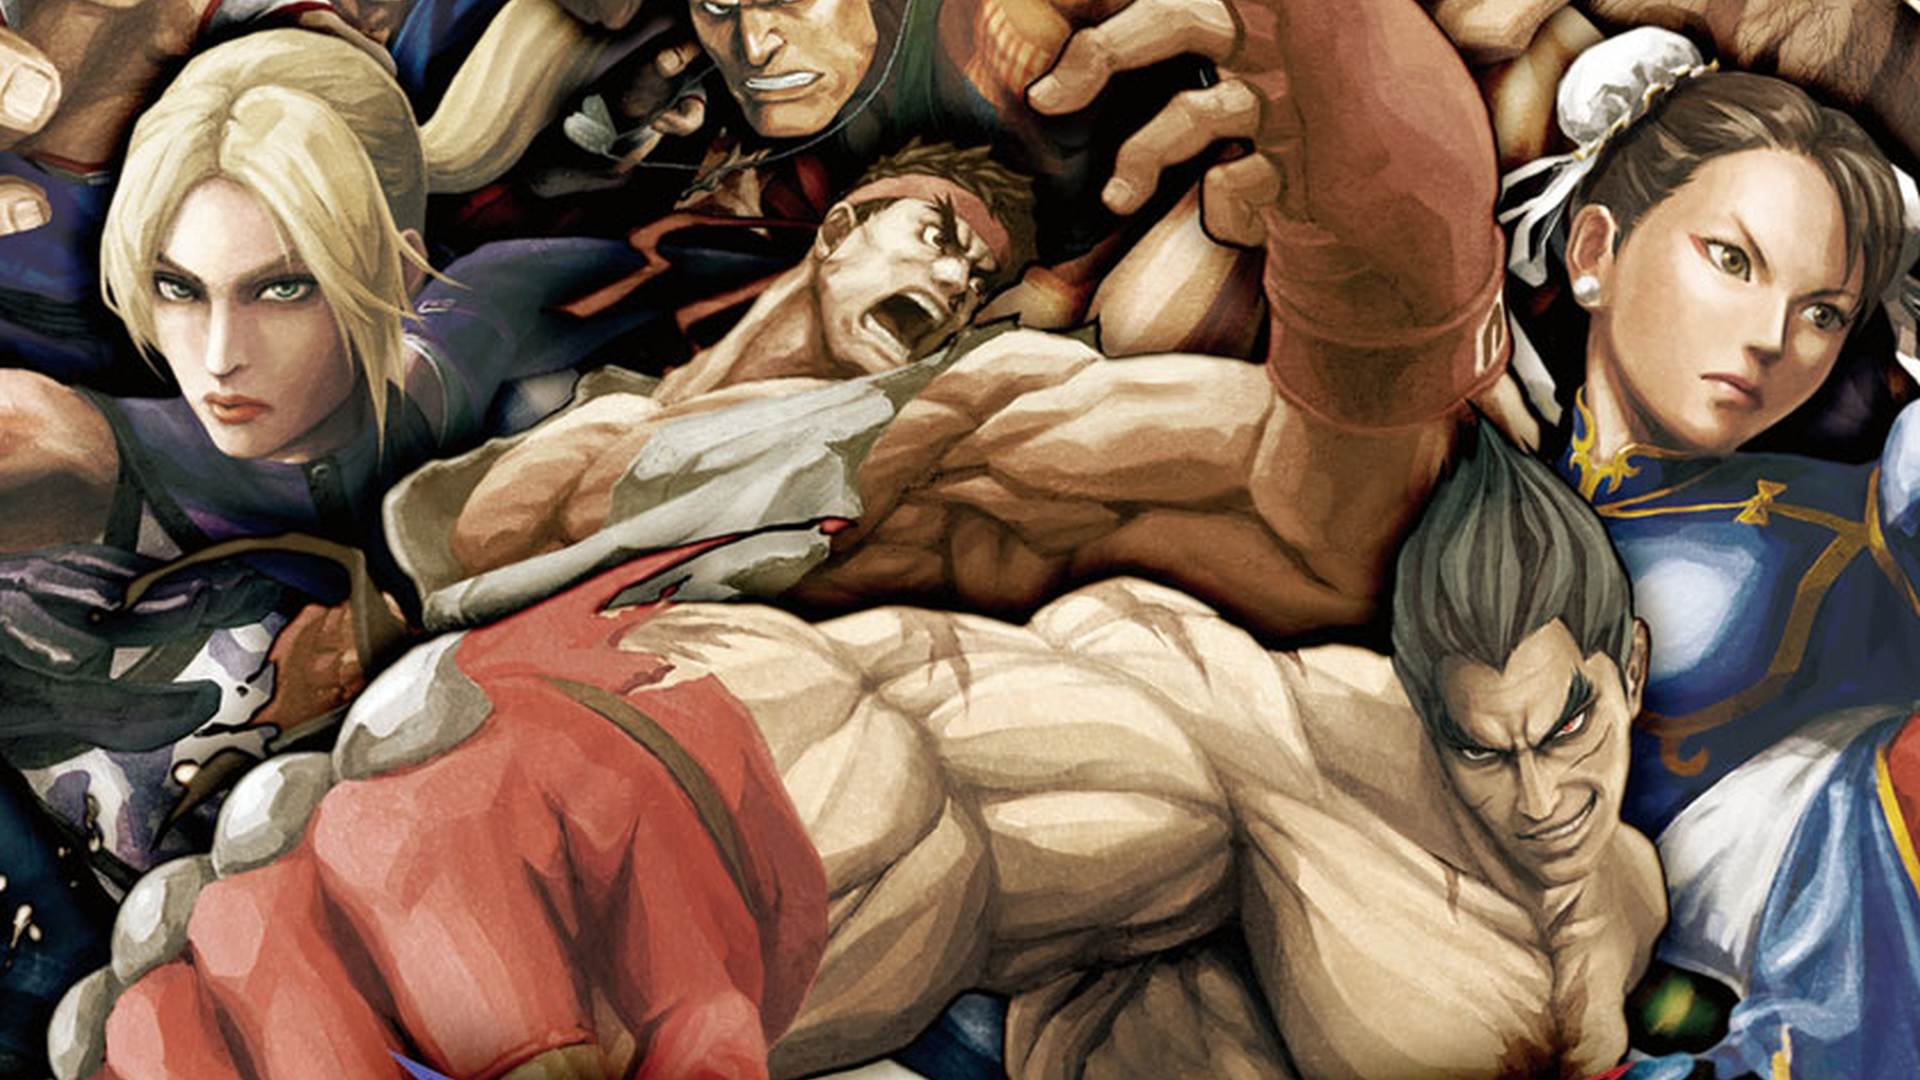 Capcom and SNK are collaborating again, but not for the Capcom vs. SNK  crossover we were hoping for